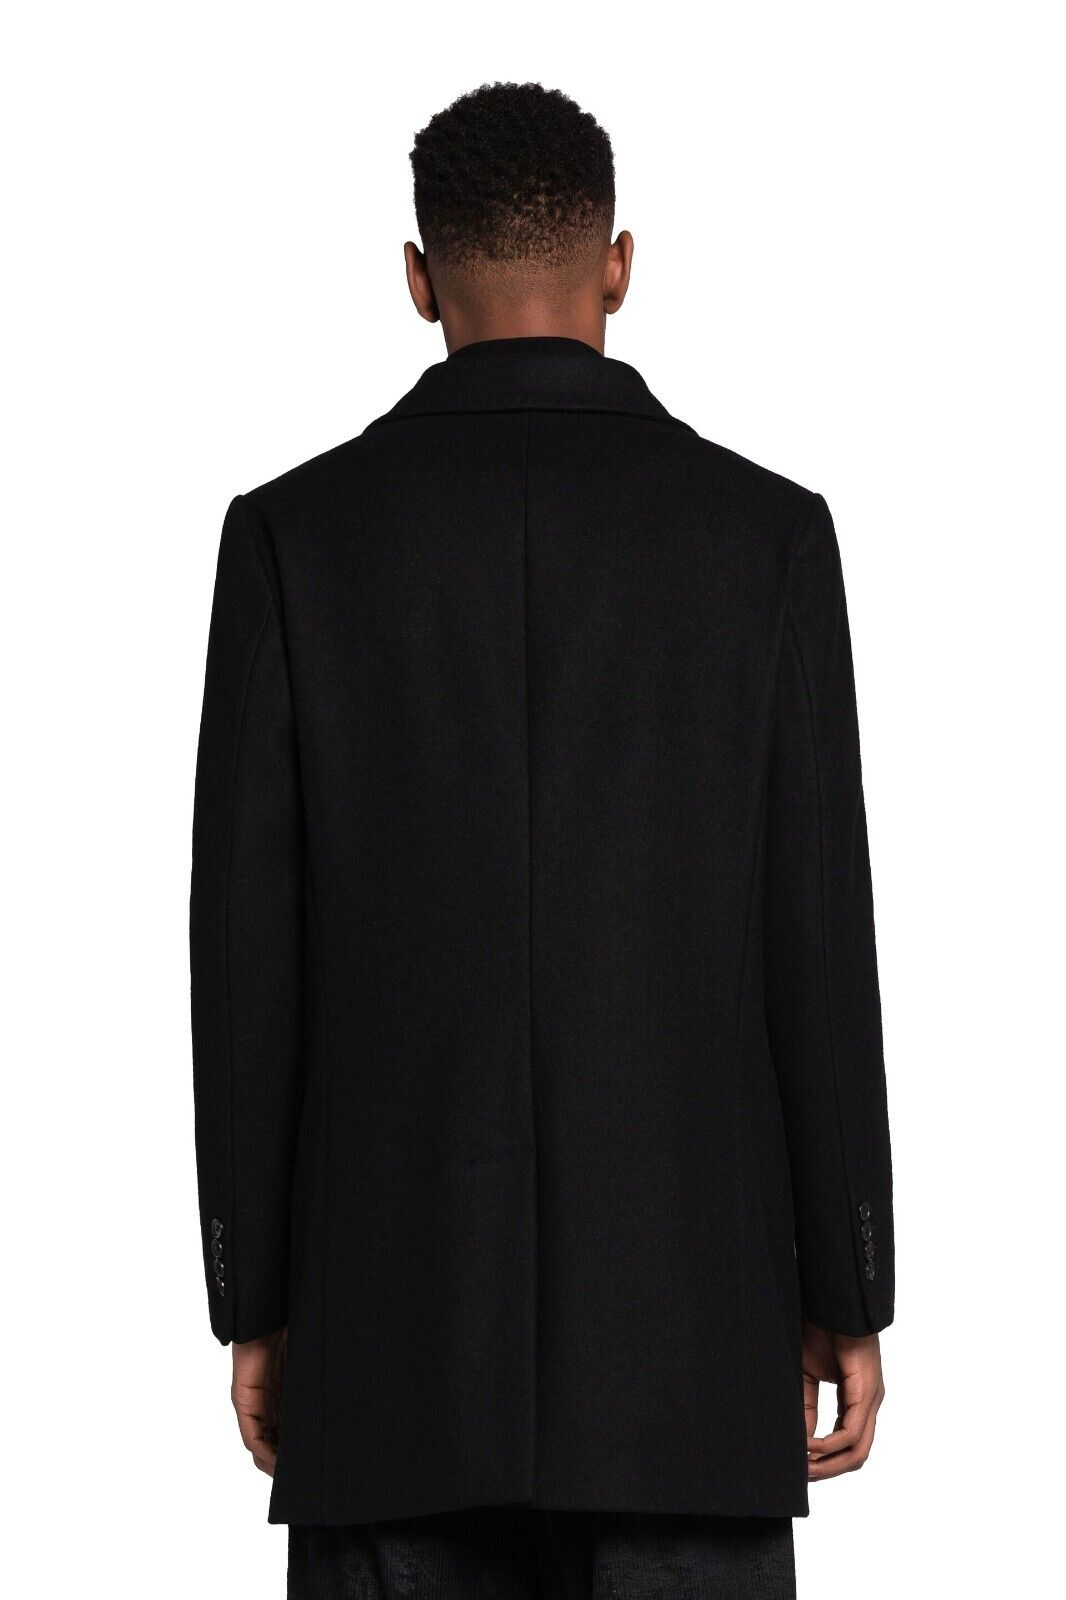 Black Cashmere Overcoat Coat Formal Funeral Wool Mens Covert Trench Coats - Brand New